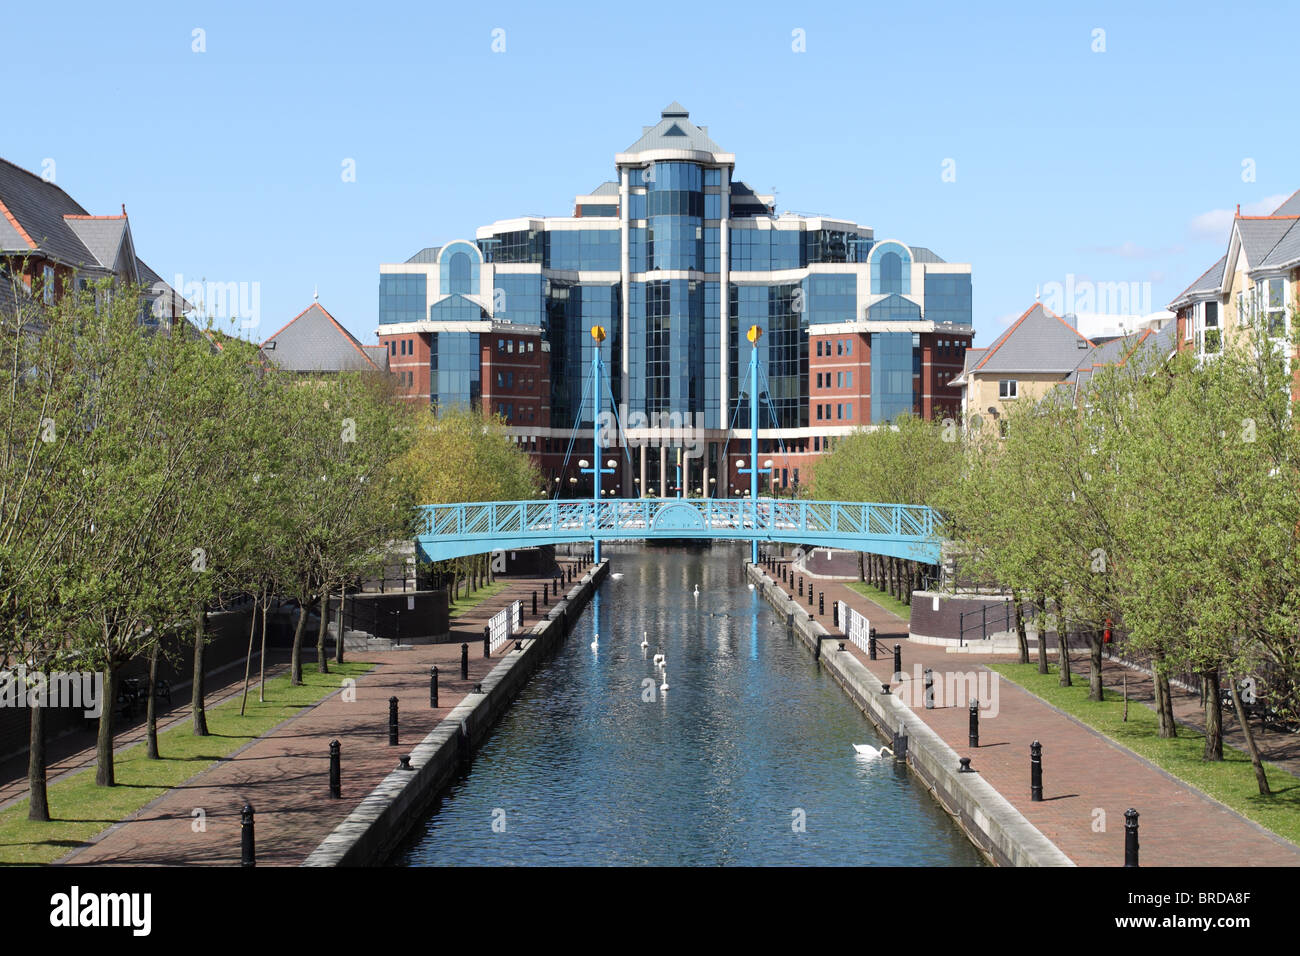 Modern Offices and Housing at Salford Quays built in the regenerated Salford docks. Part of the Manchester Ship Canal. Stock Photo